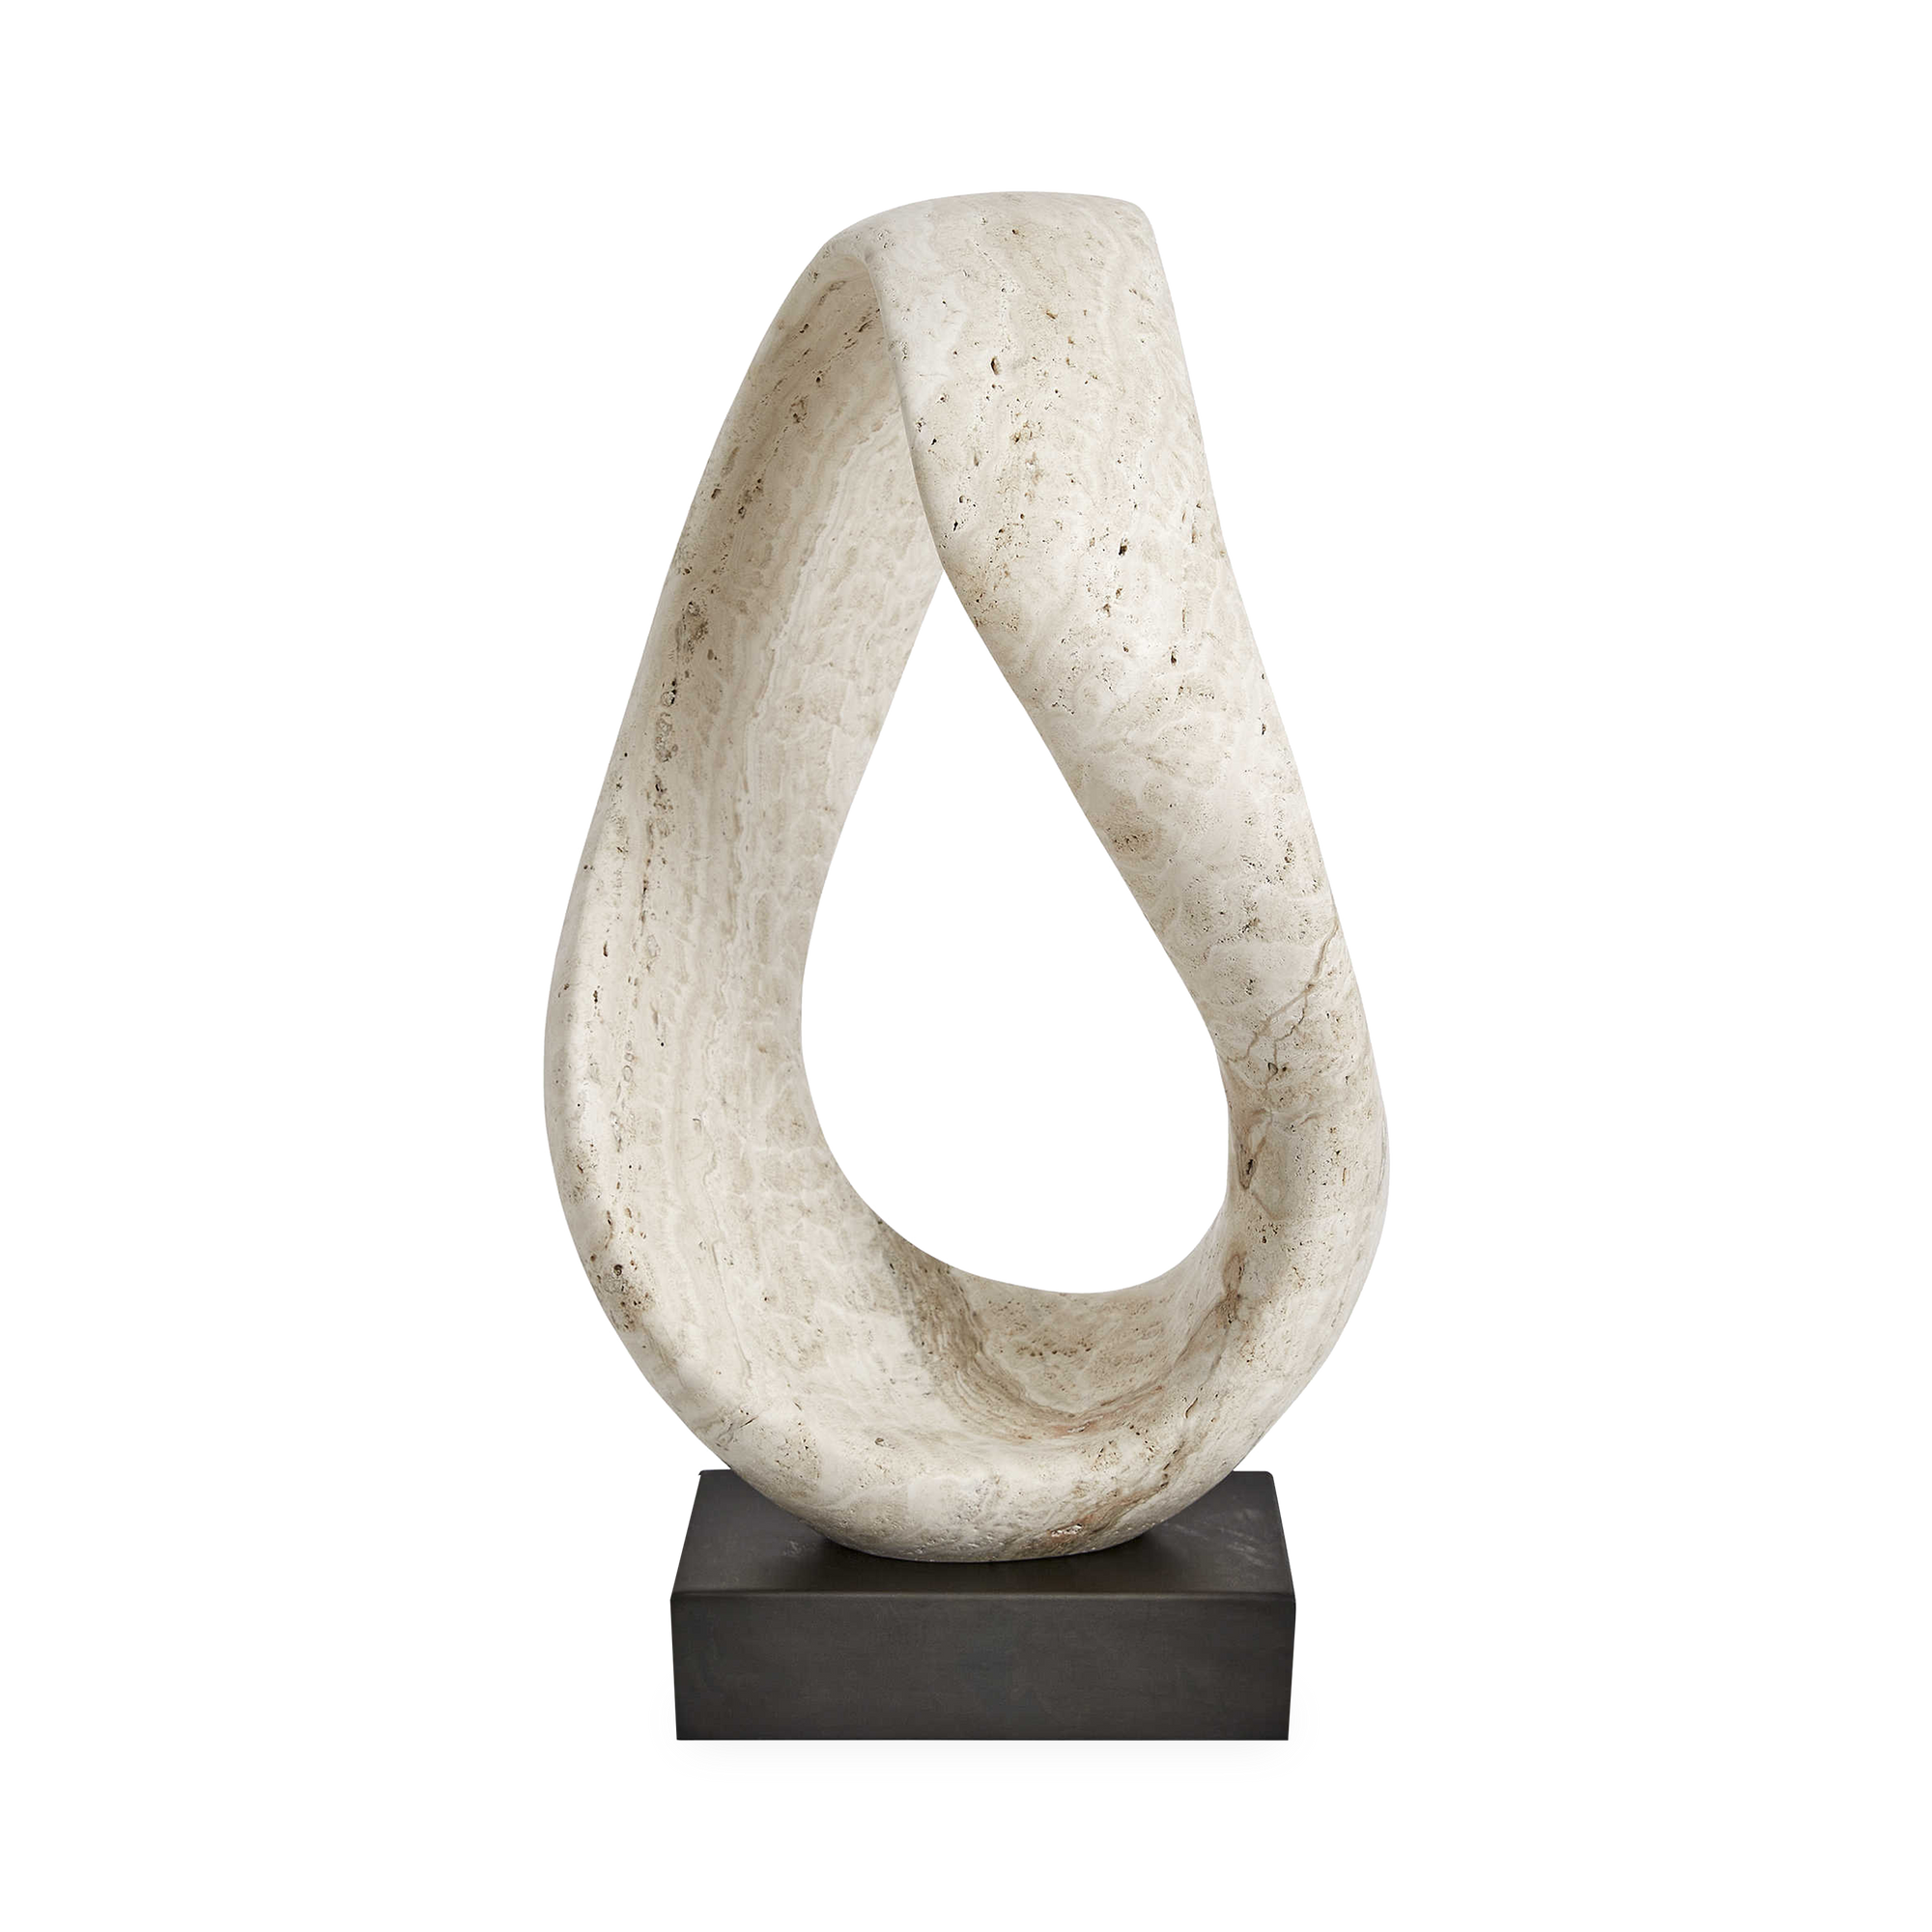 Characterized by its endless twisted loop form, the Twist Travertine Sculpture features a beige, unfilled honed travertine body and sits atop a bronzed metal base.